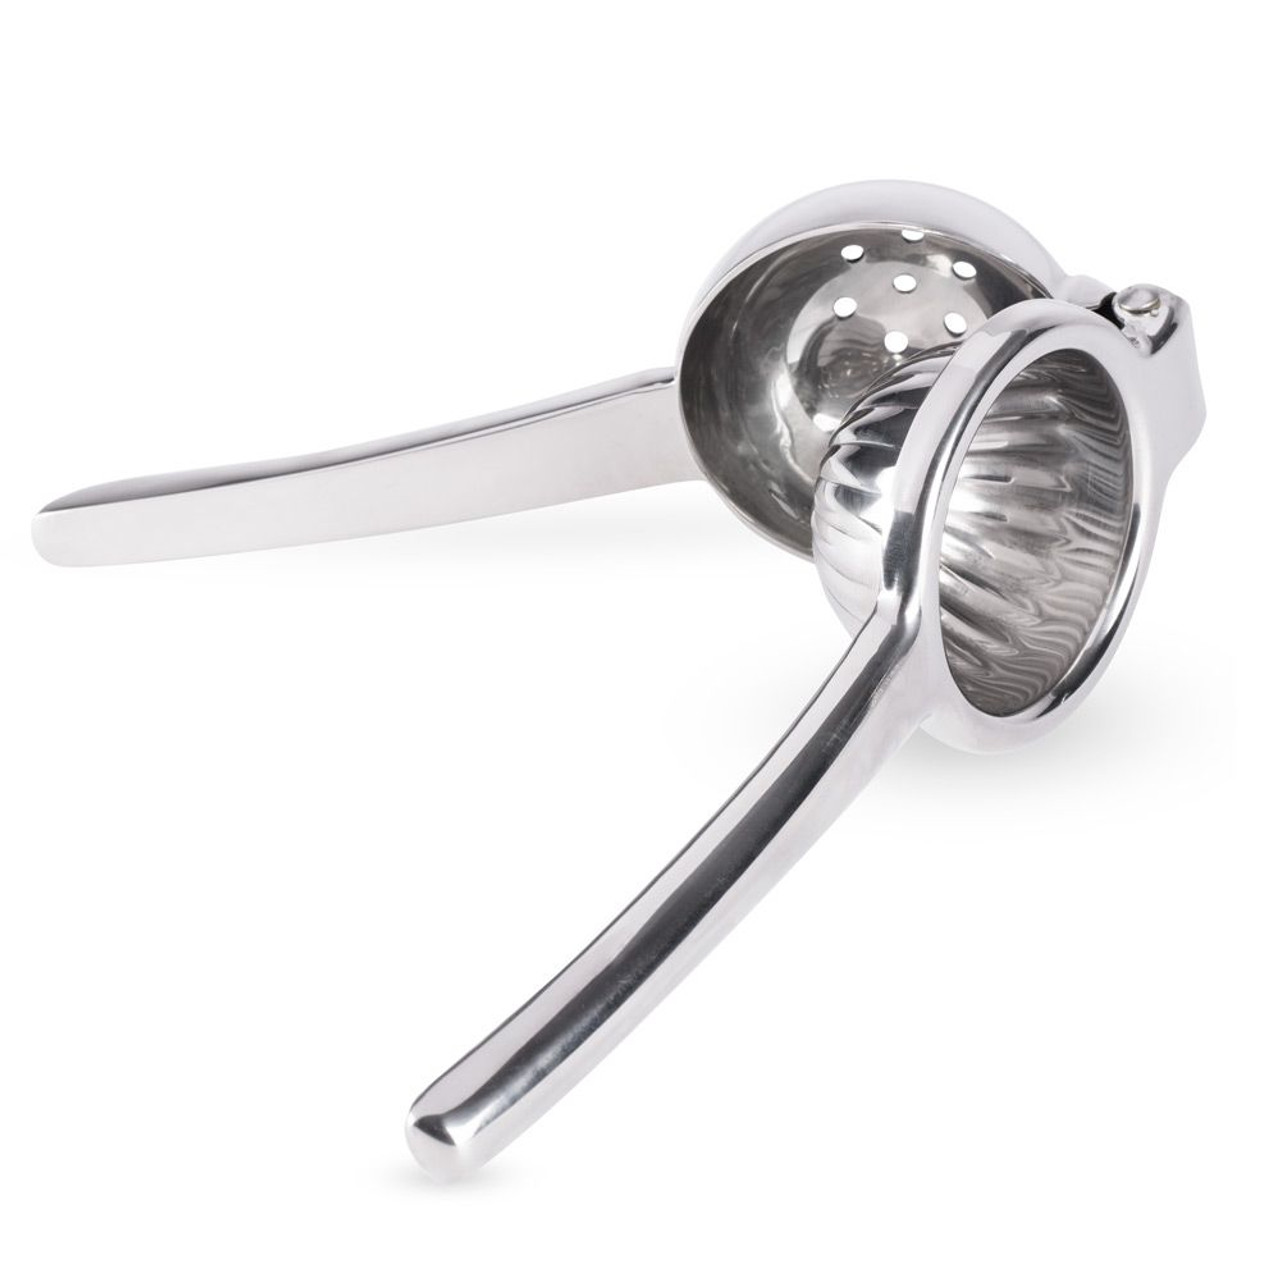 https://cdn11.bigcommerce.com/s-cznxq08r7/images/stencil/1280x1280/products/779/9489/ub611_urban-bar-professional-stainless-steel-juice-squeezer_01_1__66468.1590772703.jpg?c=1